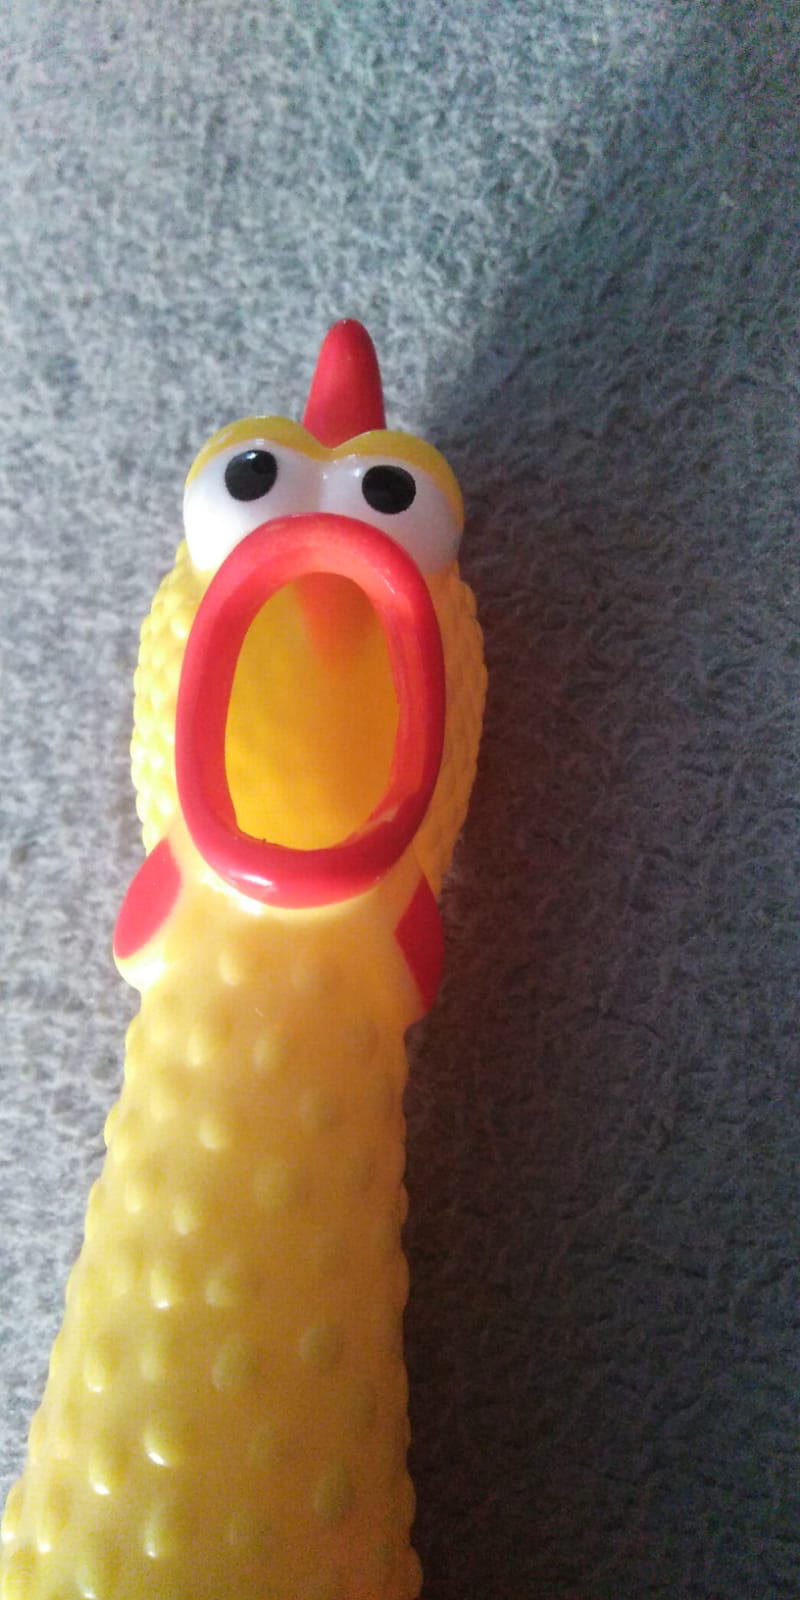 Funny Family Feud Question: Name a bizarre use for a rubber chicken.